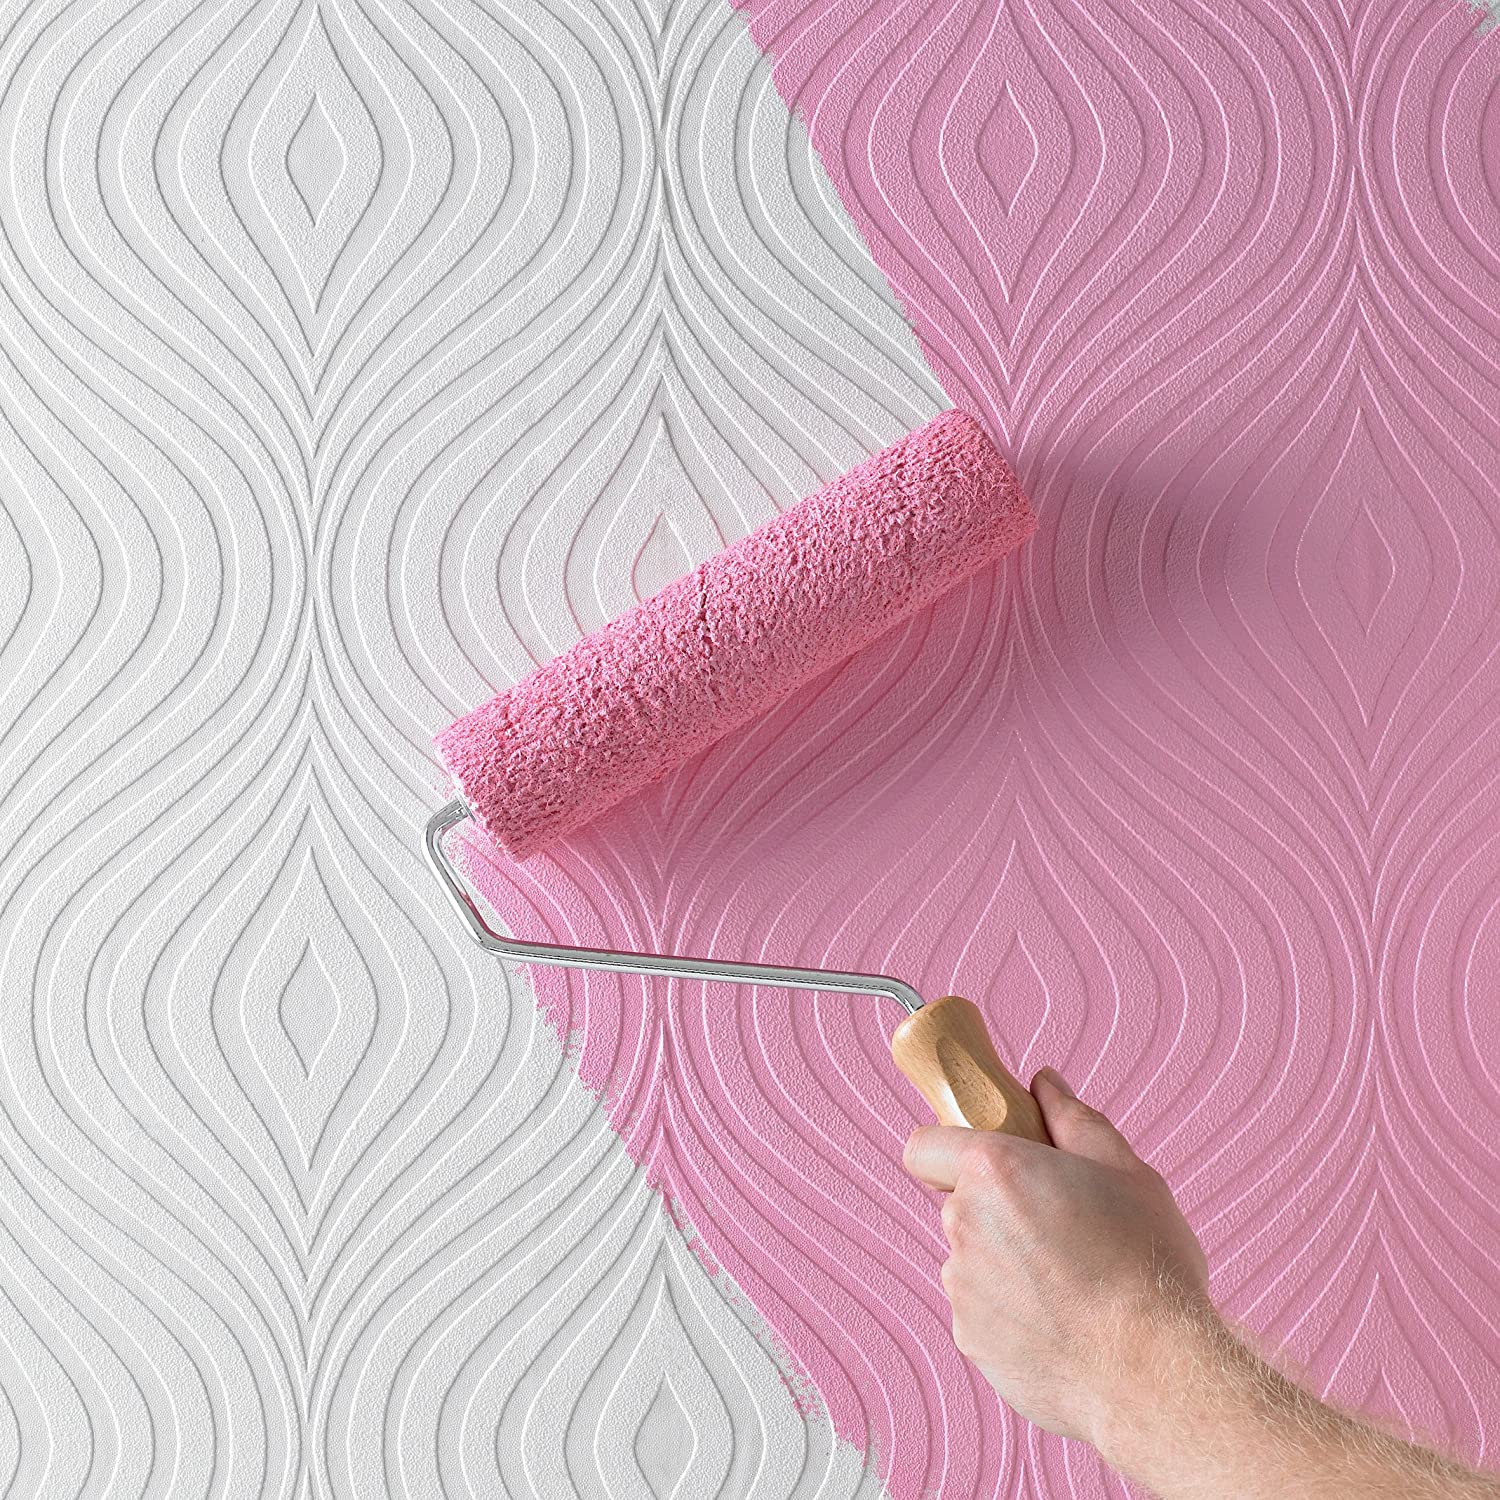 Paintable wallpaper is a clever option for families with young kids